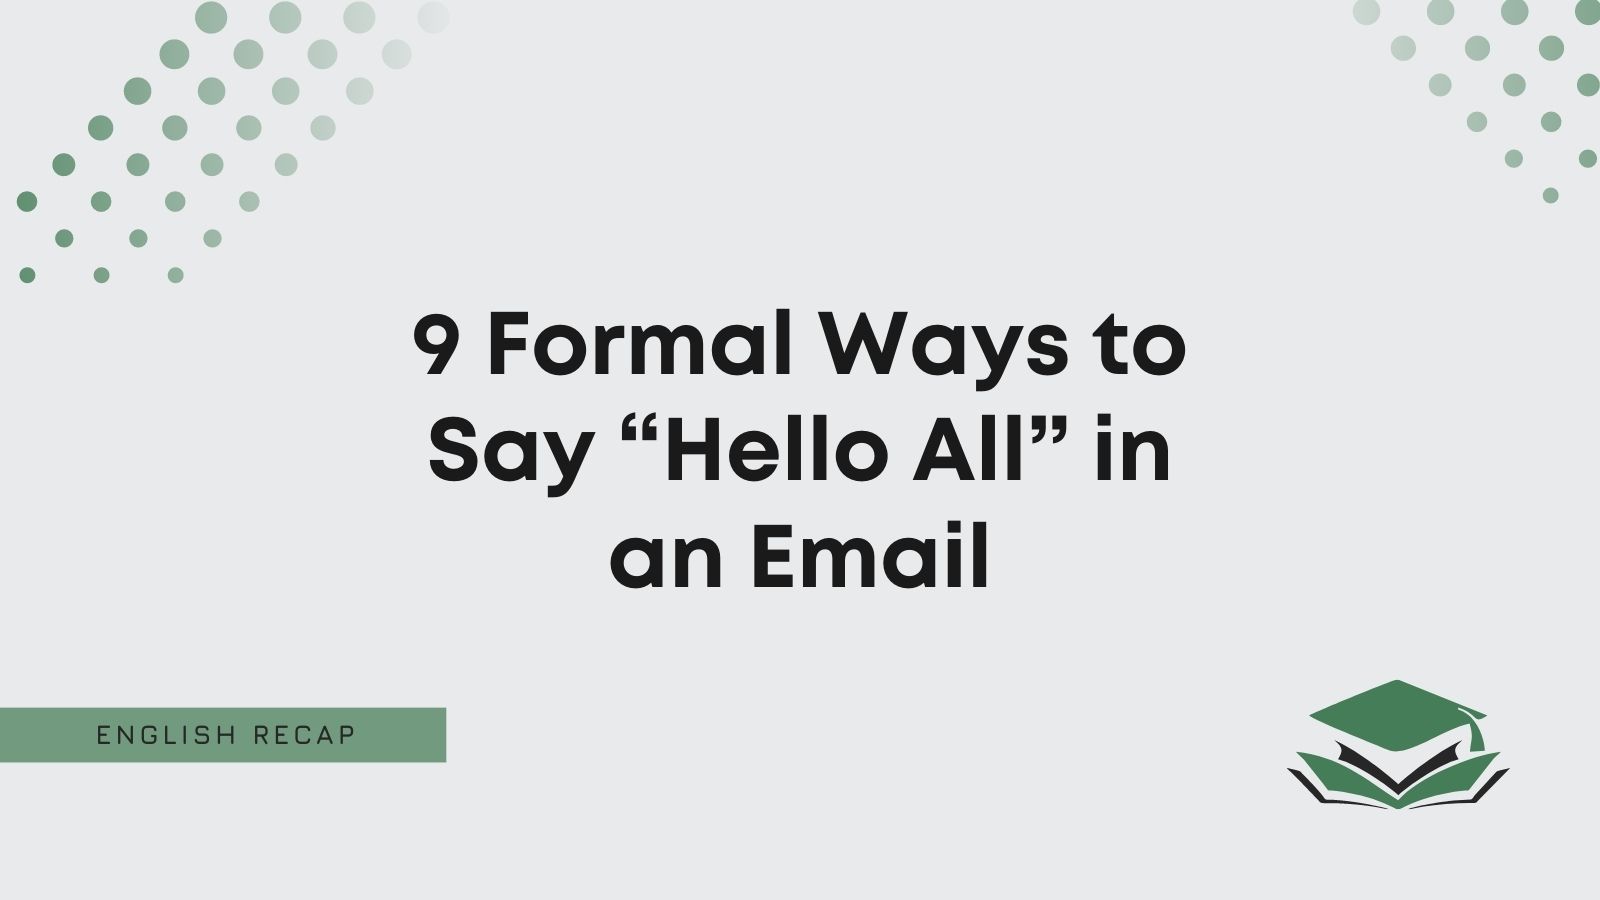 9 Formal Ways to Say “Hello All” in an Email - English Recap